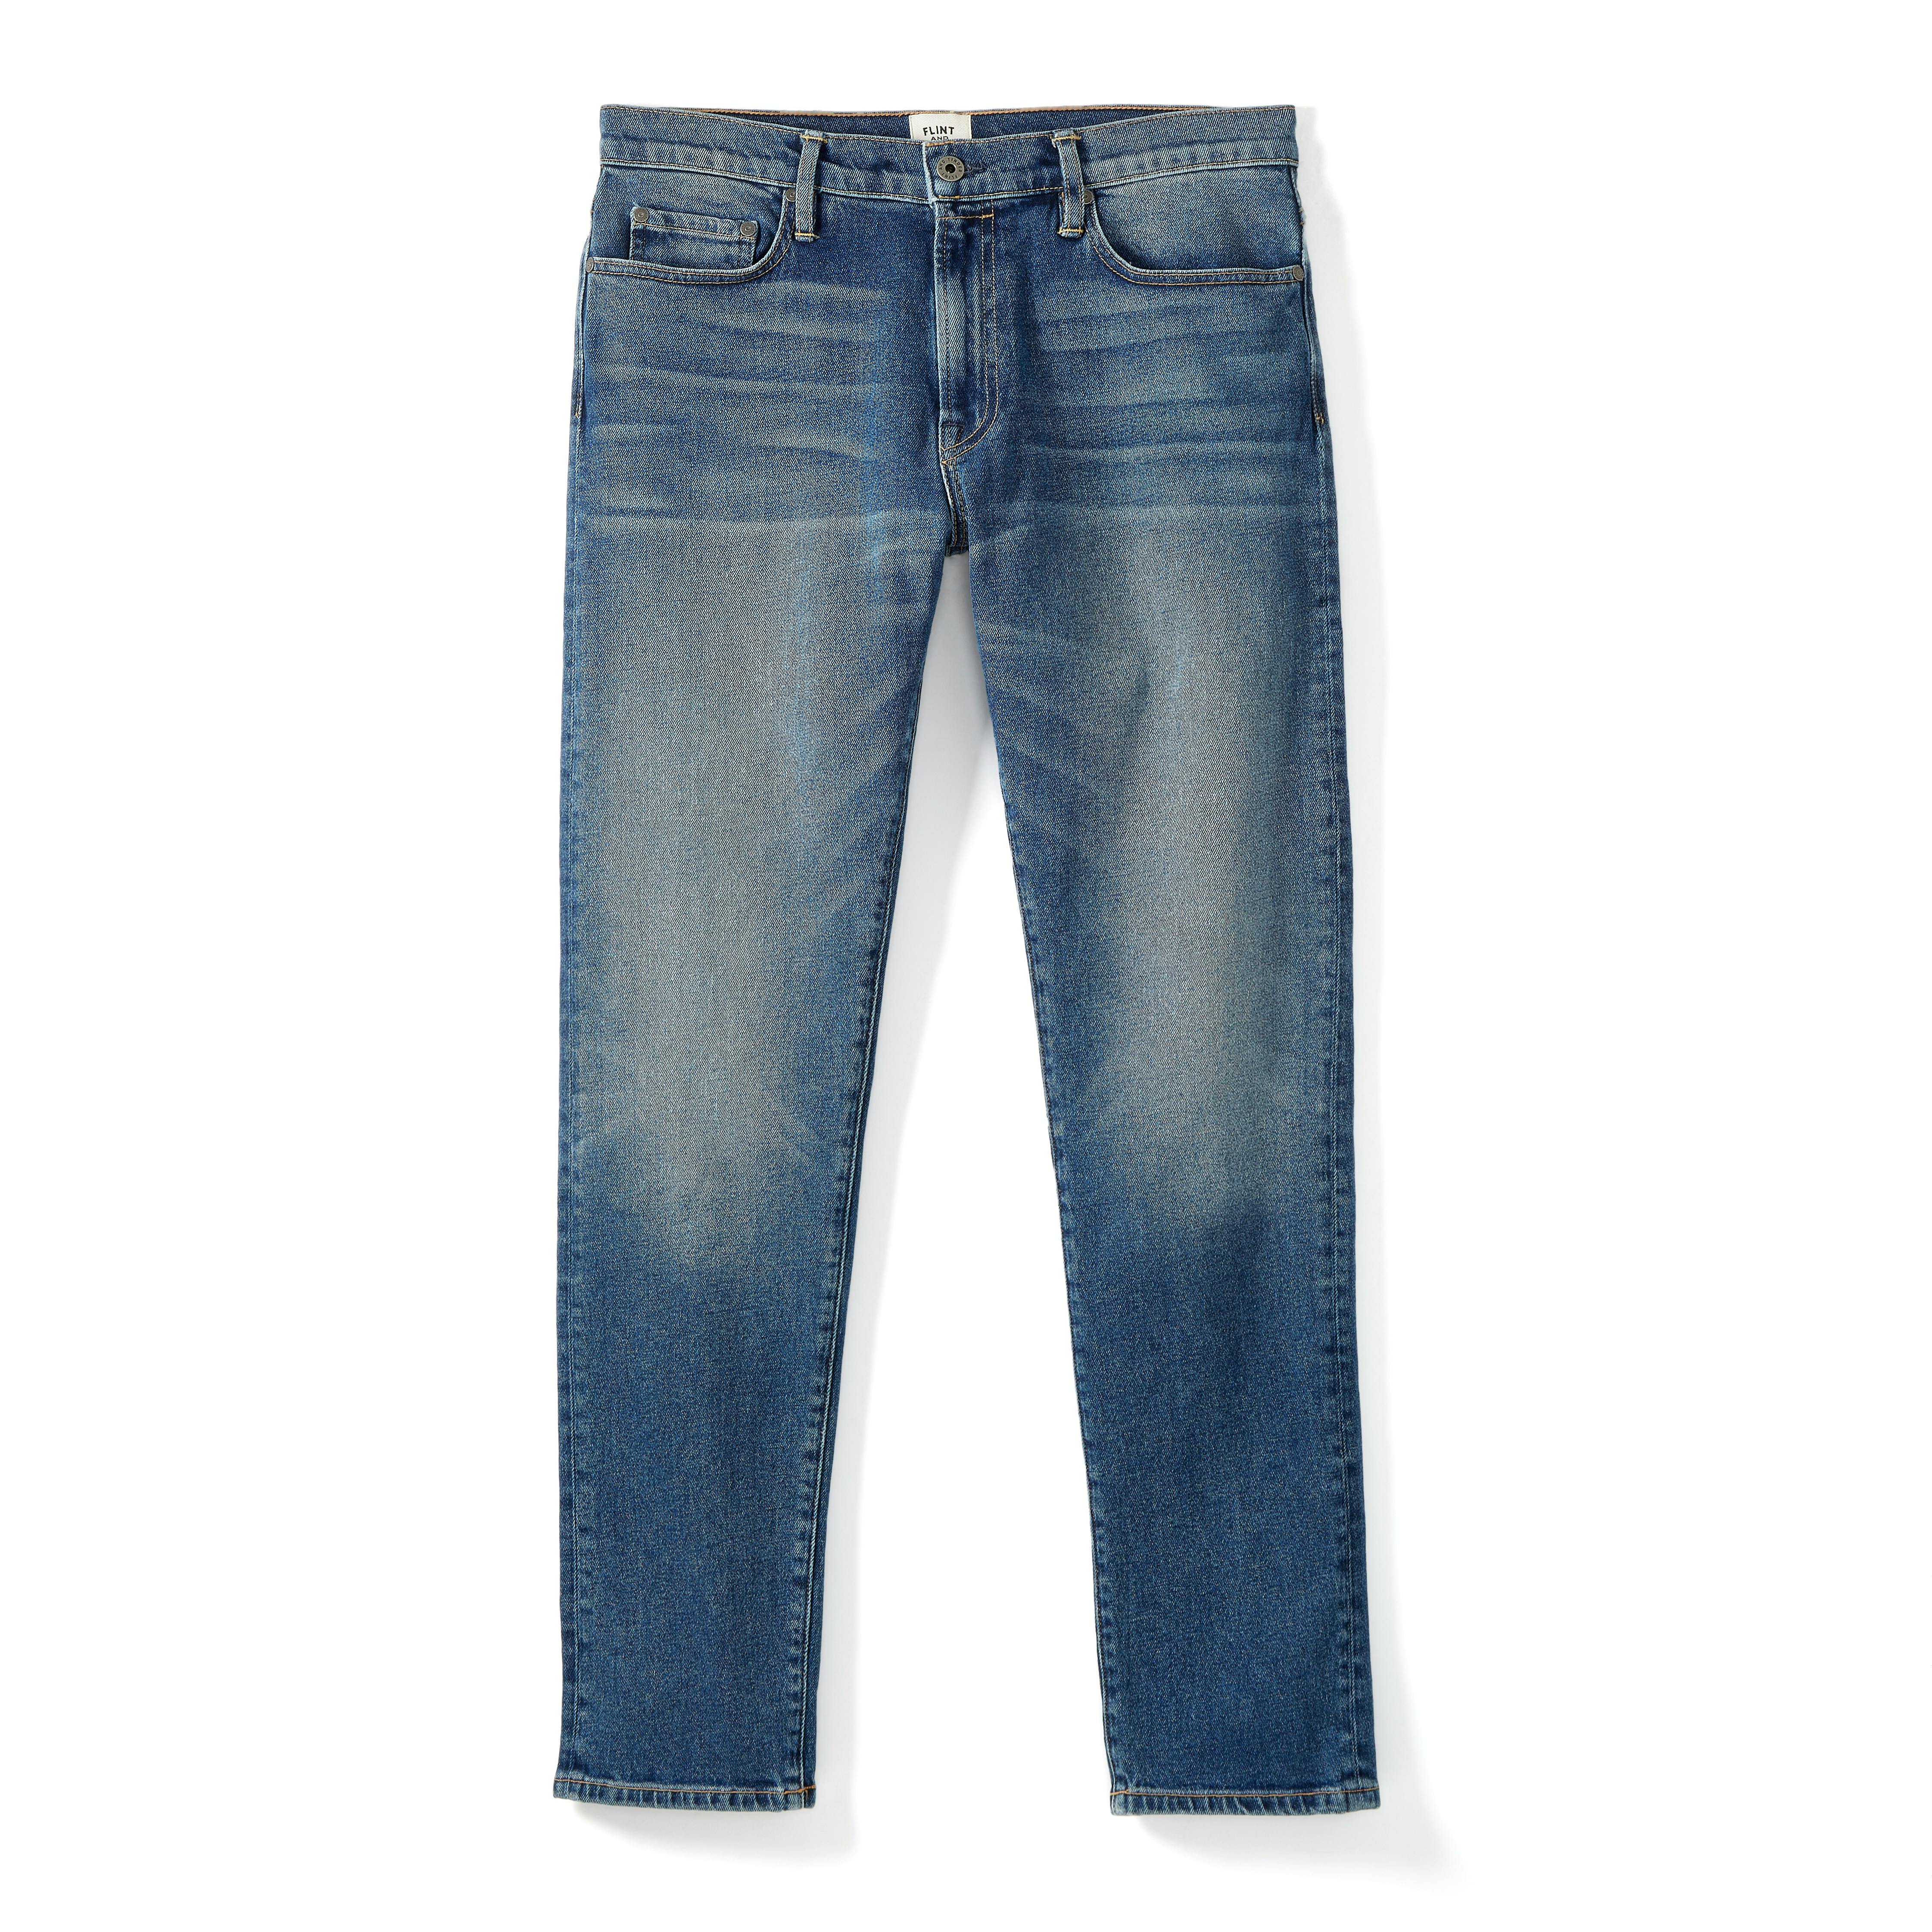 Flint and Tapered (1-Year Huckberry Medium Tinder | Wash) All-American Stretch Jeans - - Denim Athletic 